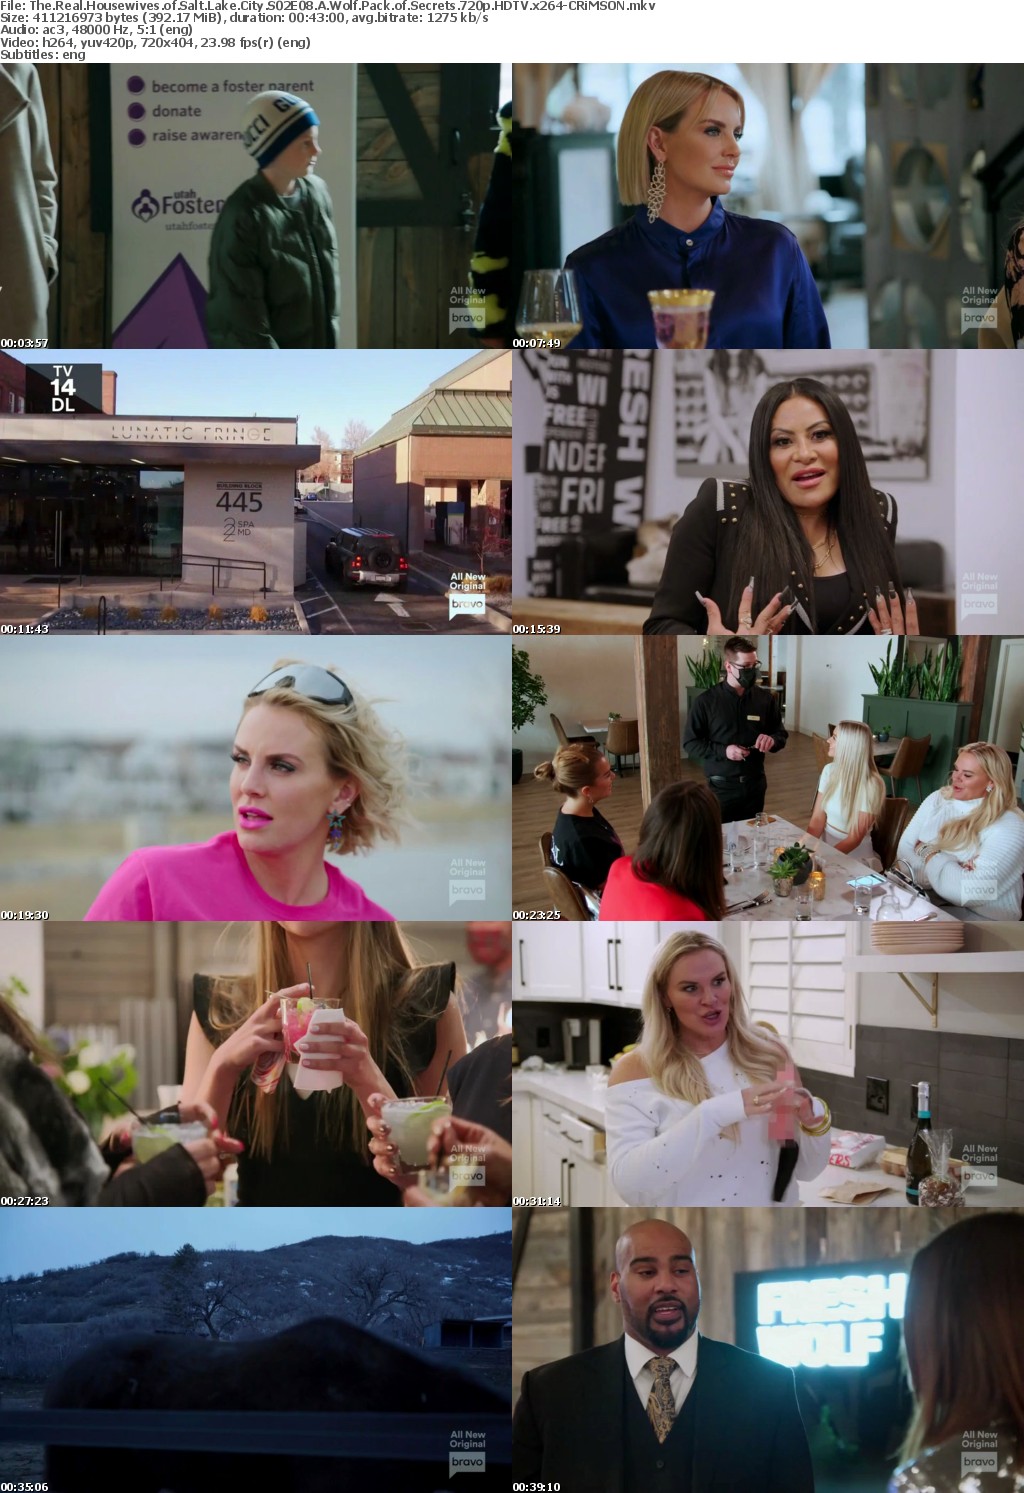 The Real Housewives of Salt Lake City S02E08 A Wolf Pack of Secrets 720p HDTV x264-CRiMSON